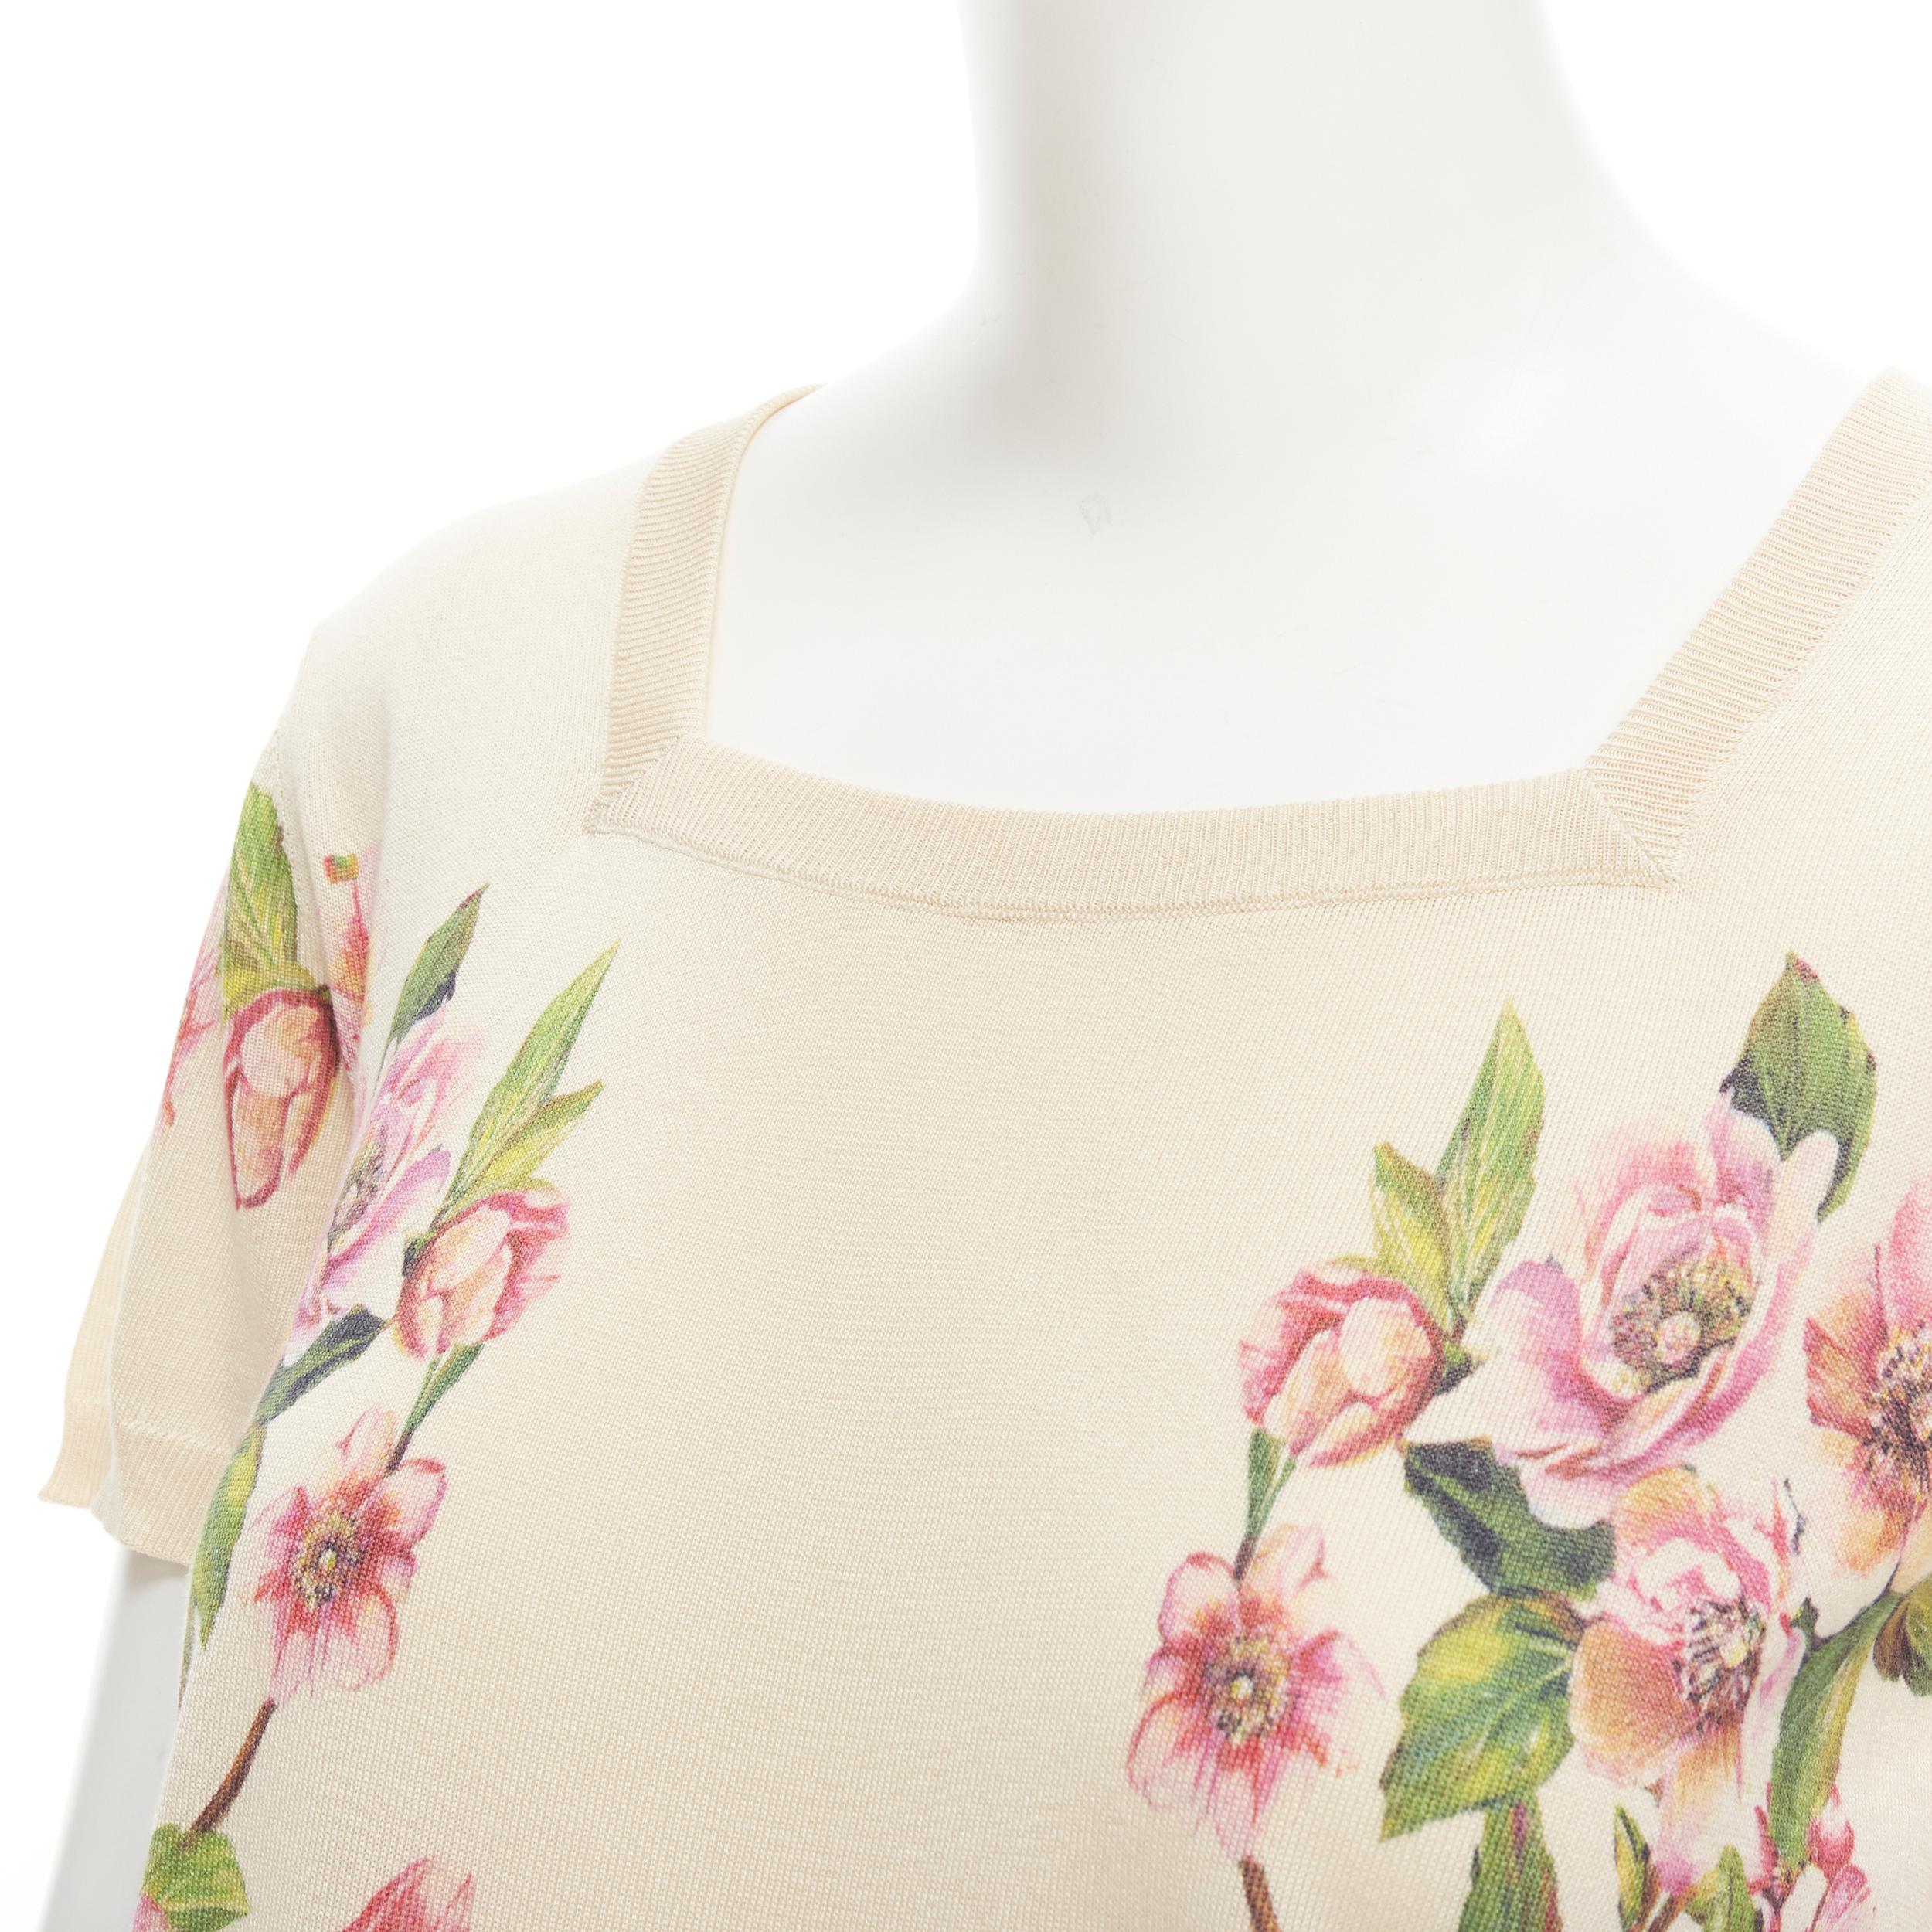 DOLCE GABBANA 100% silk cream pink blossom square neck sweater IT36 XS 
Reference: TGAS/B02039 
Brand: Dolce Gabbana 
Material: Silk 
Color: Beige 
Pattern: Floral 
Extra Detail: Square neck. Short sleeve. 
Made in: Italy 

CONDITION: 
Condition: